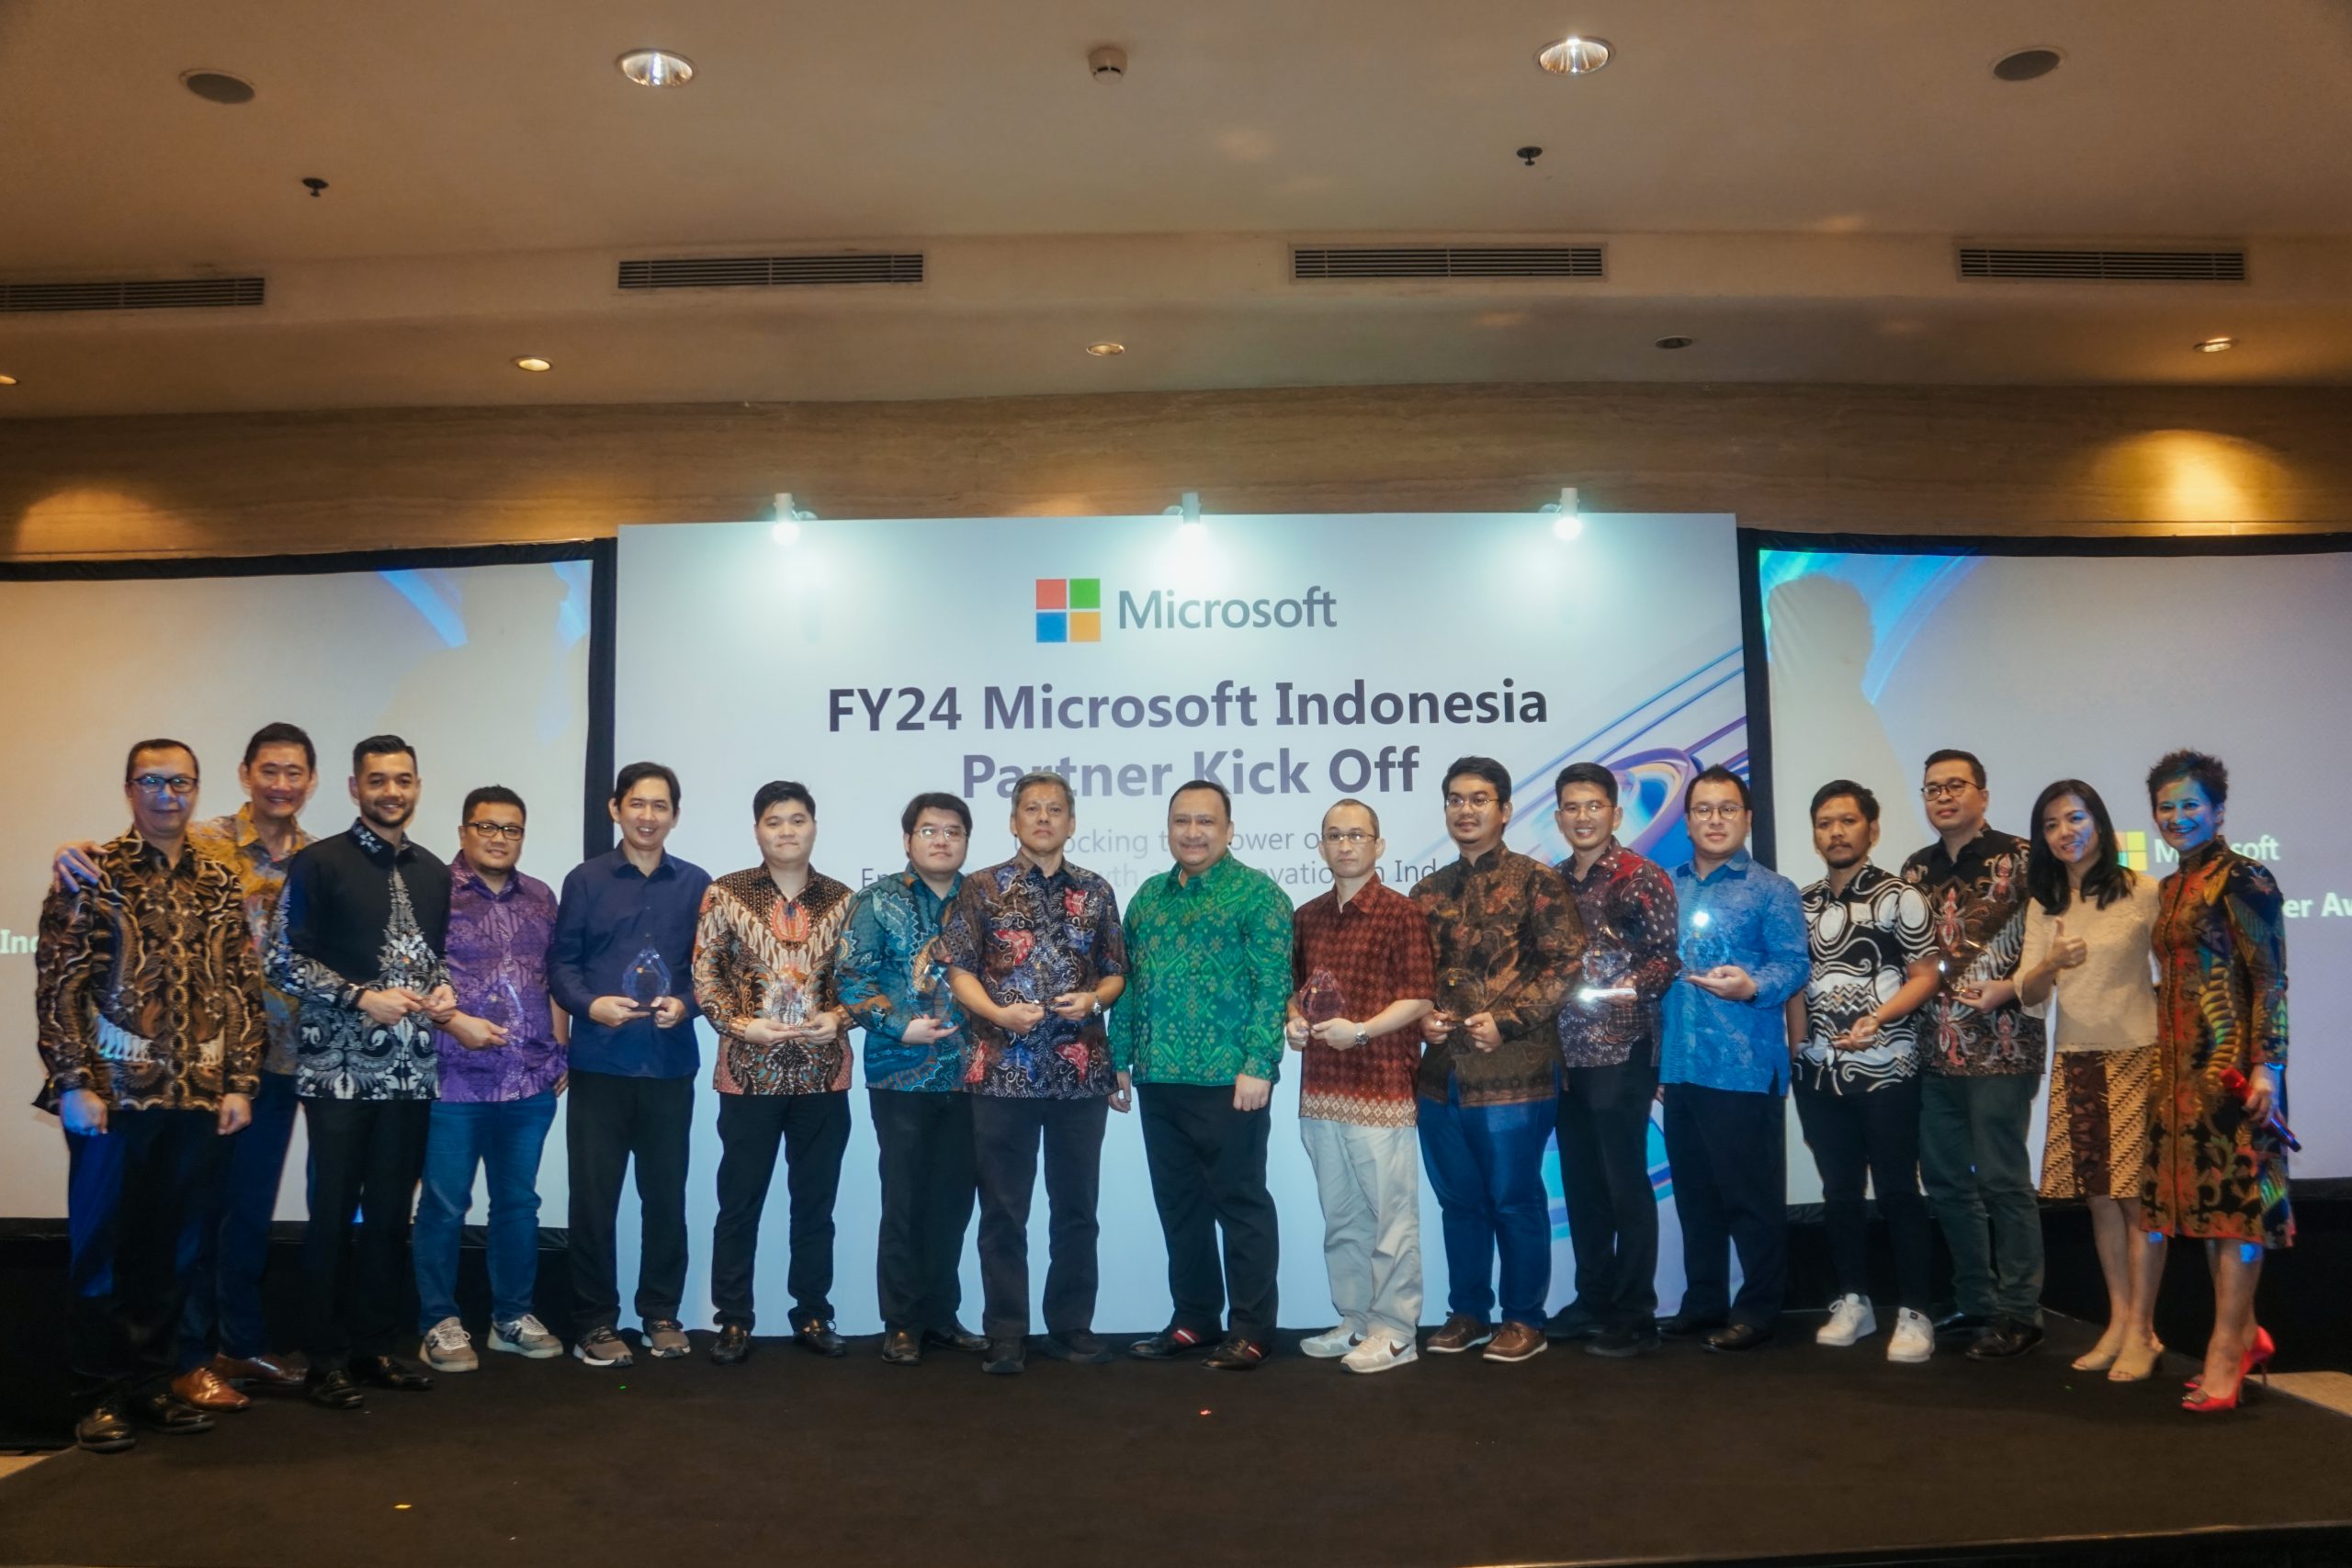 A photo of the Microsoft Indonesia FY24 Partner Kick Off event